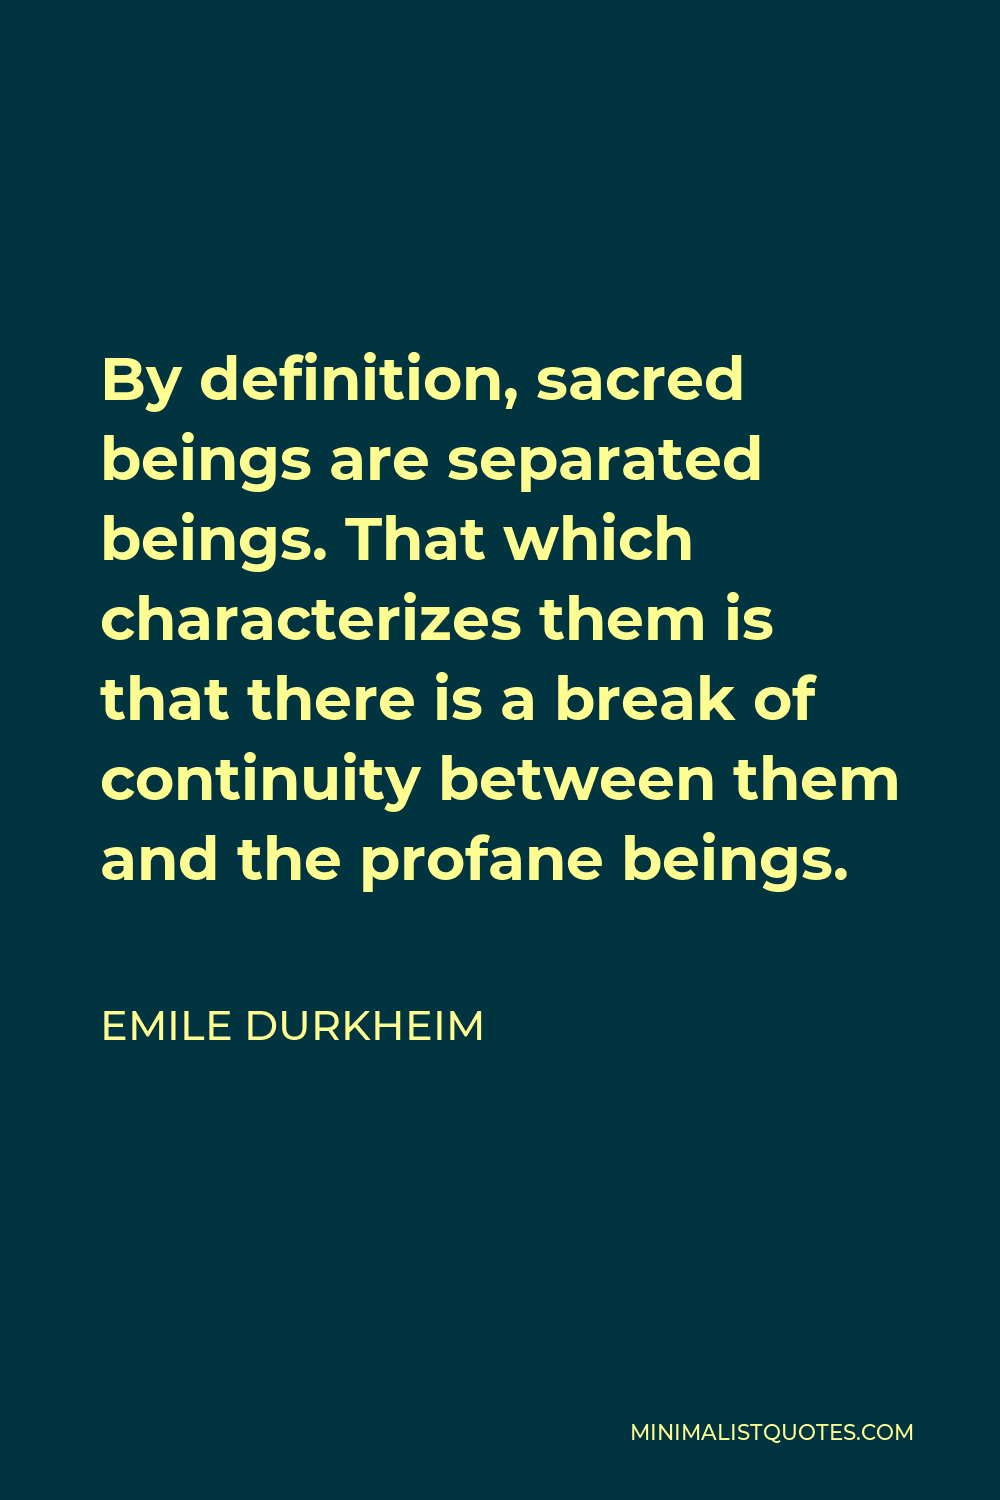 Emile Durkheim Quote - By definition, sacred beings are separated beings. That which characterizes them is that there is a break of continuity between them and the profane beings.